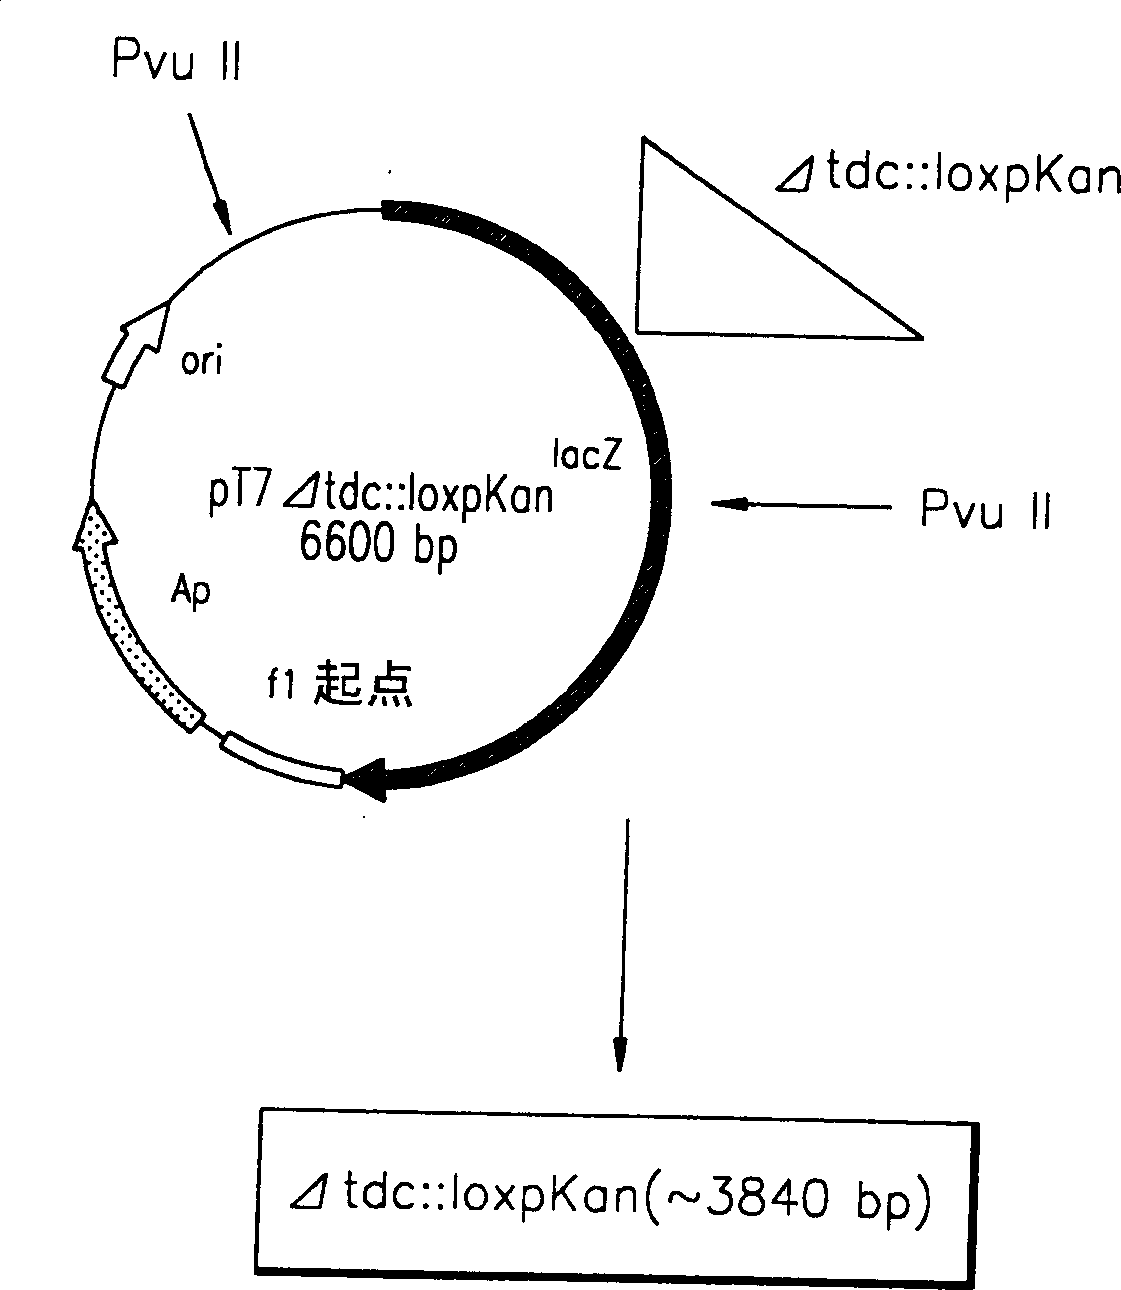 Process for prodn. of L-Thr